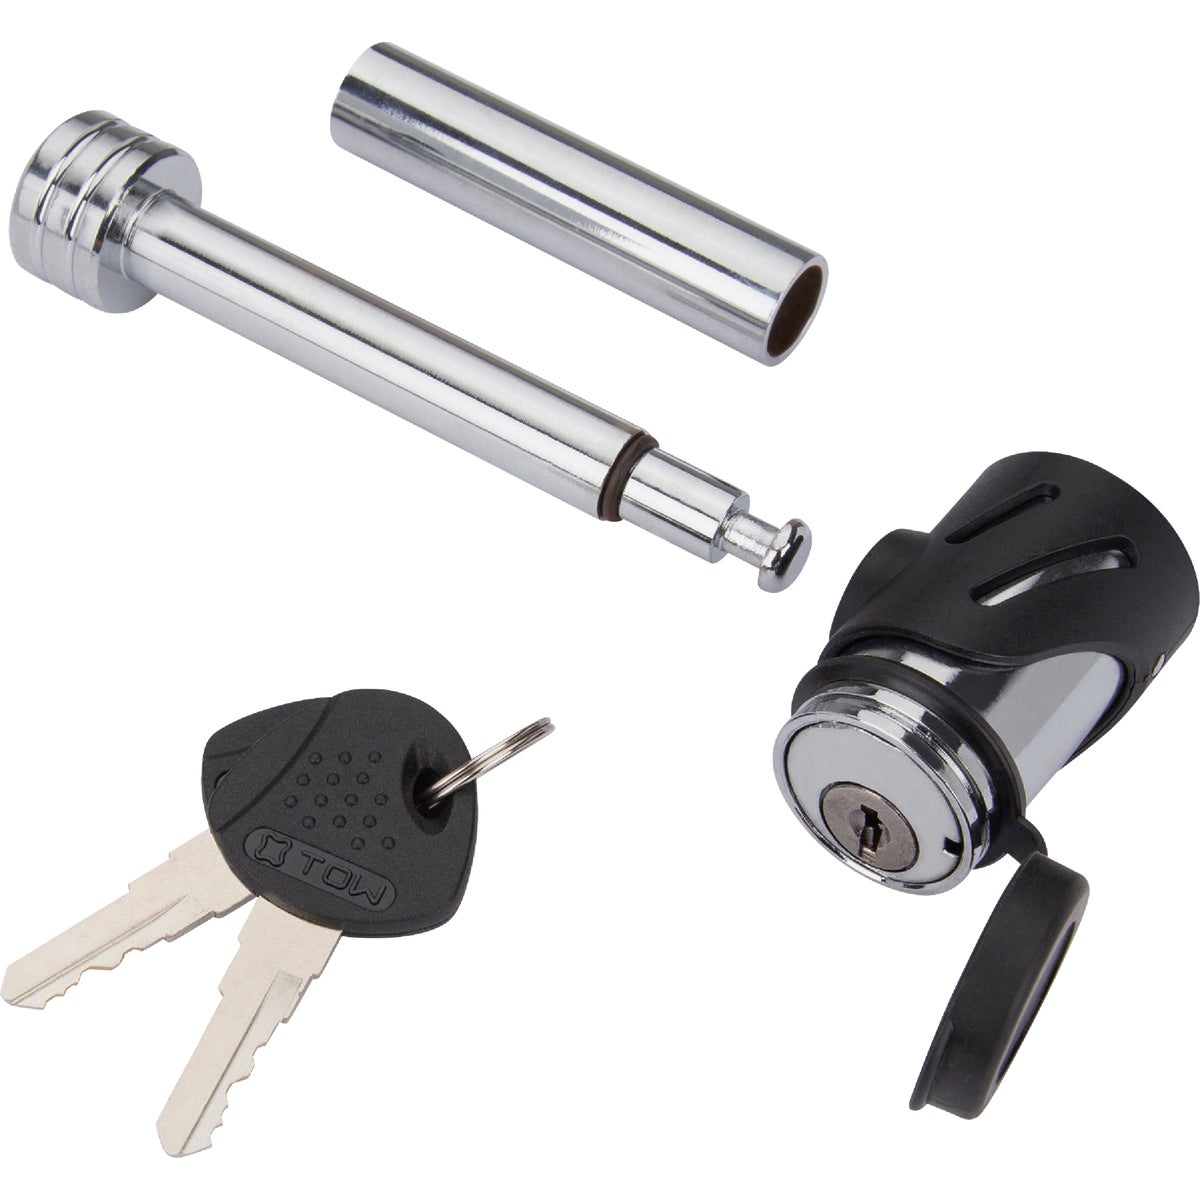 Item 579467, The Steel Right Angle Receiver Lock protects your boats, campers, trailers